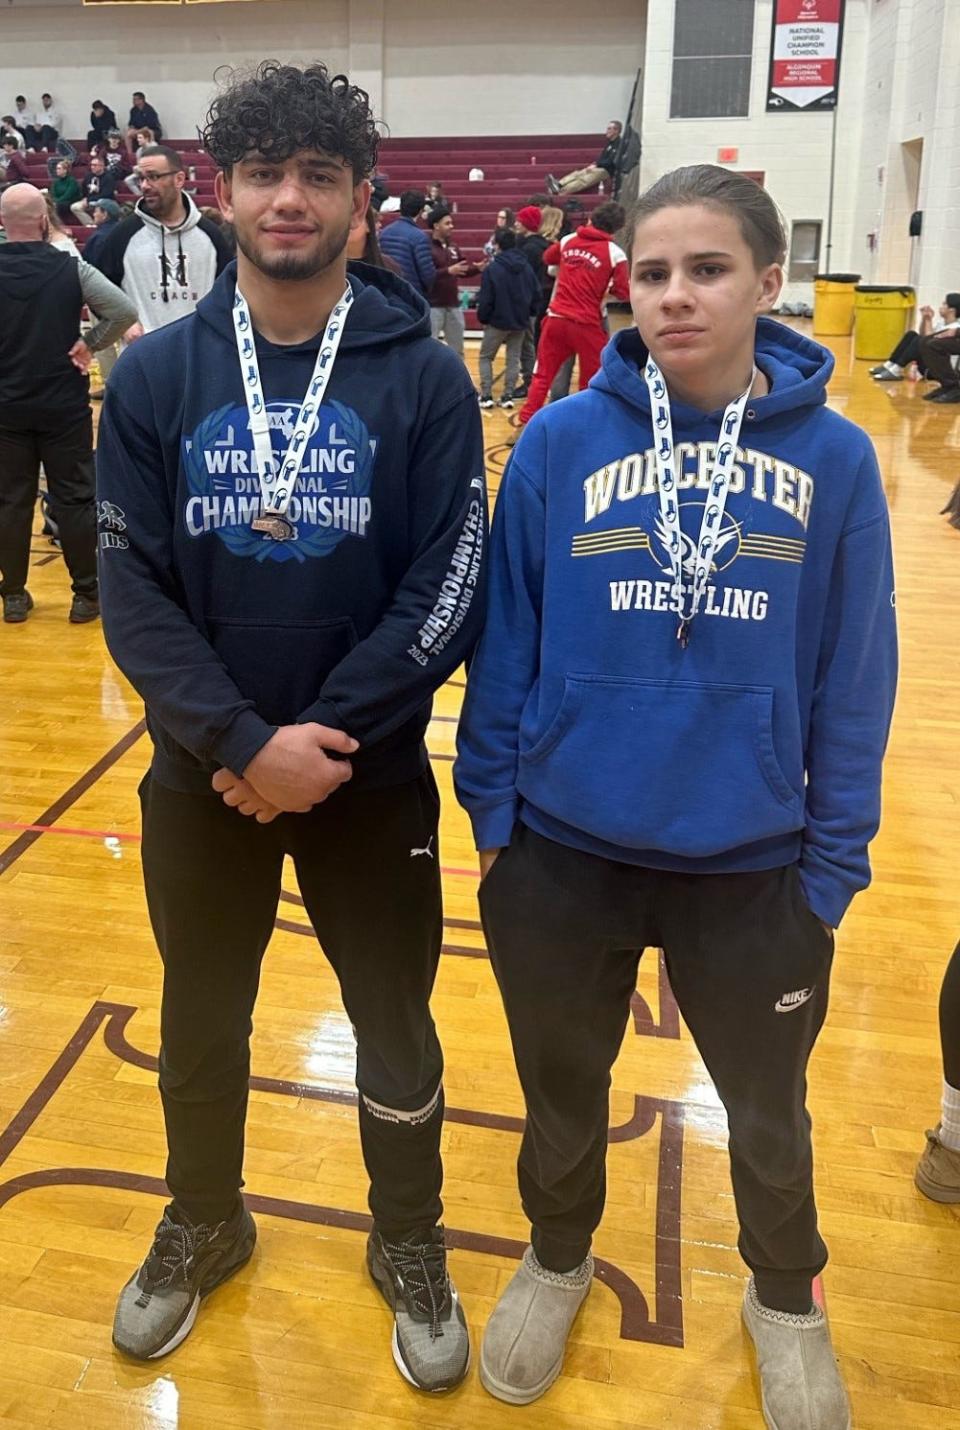 Worcester Tech's Omid Sabr (fourth place, 150 pounds) and Aaliyah River (third place, 120 pounds) pose with their medals after Saturday's Division 2 state wrestling championships at Algonquin Regional.